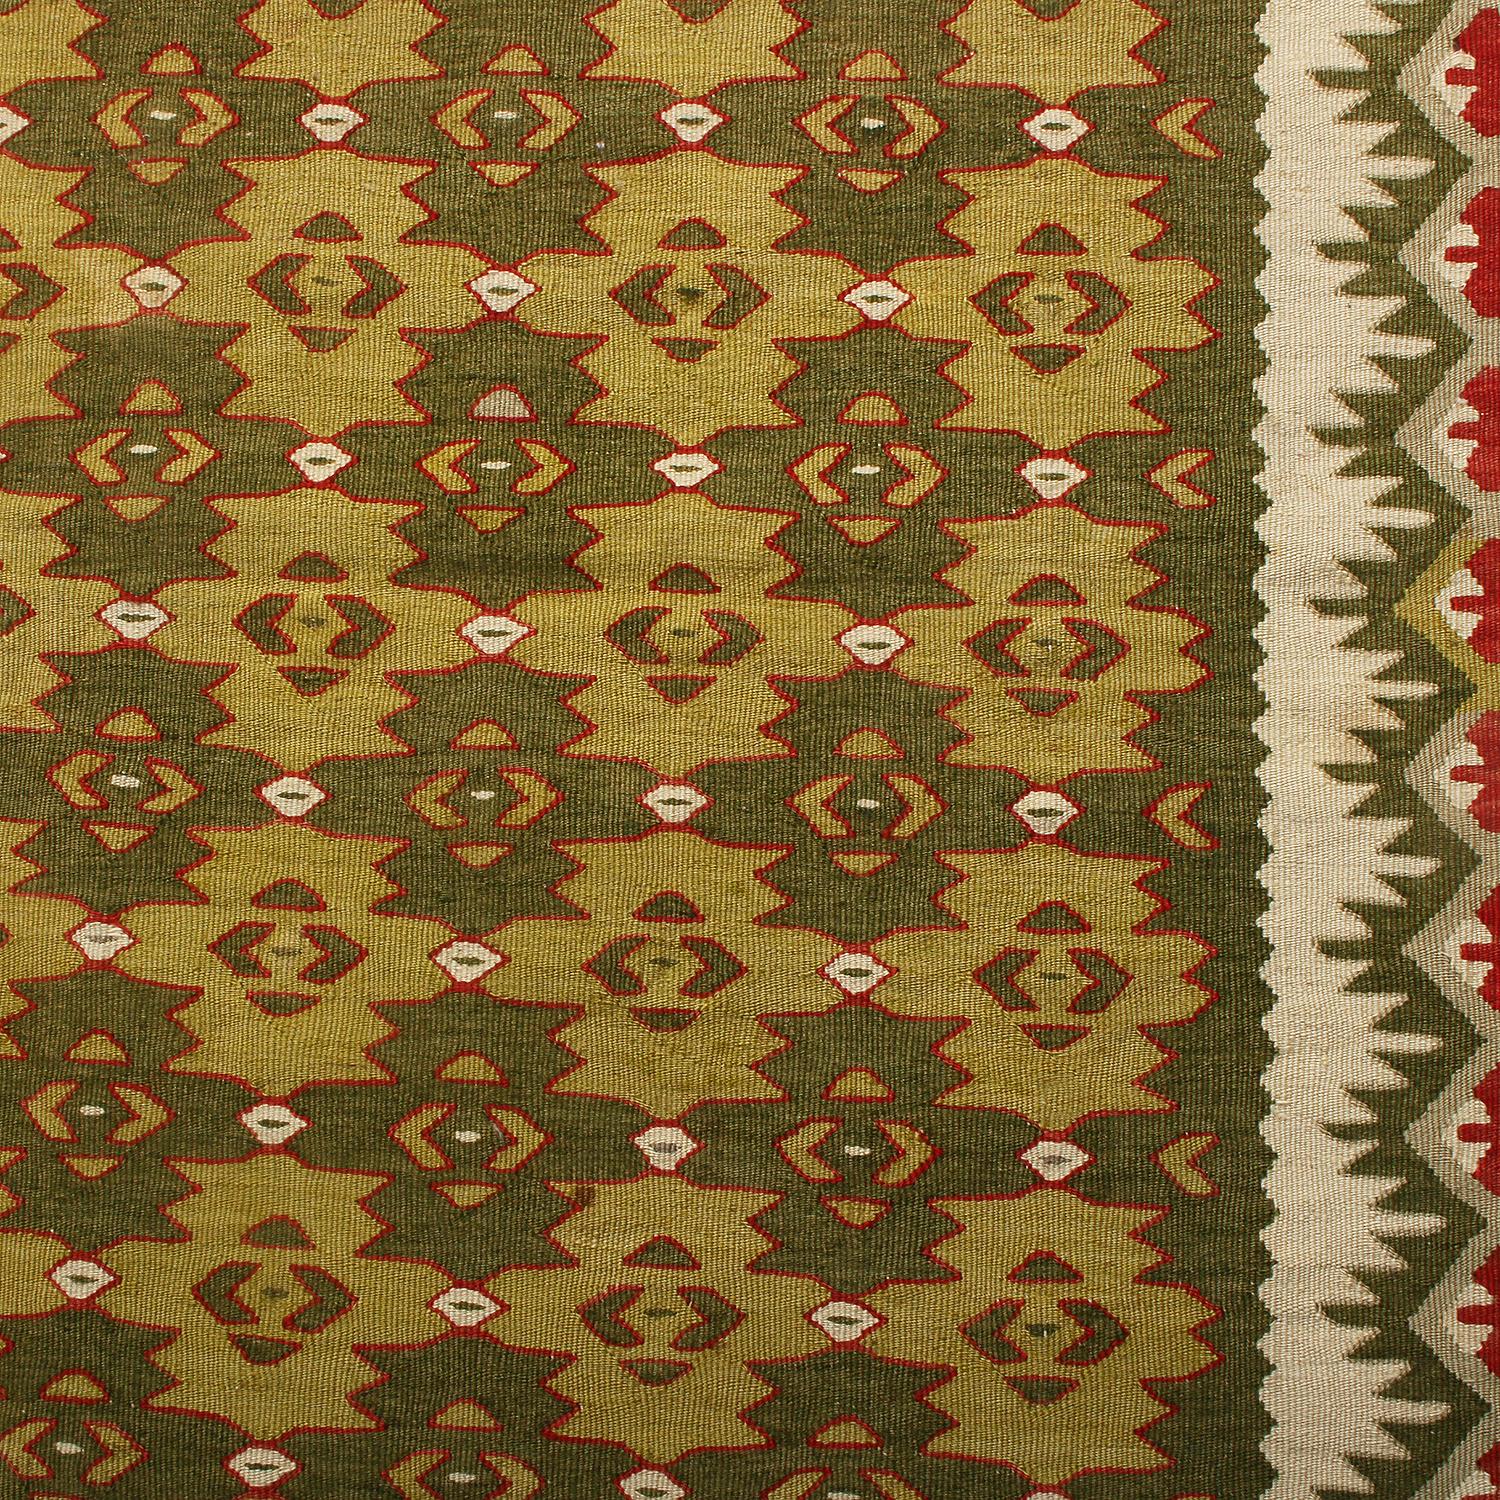 Hand-Woven Vintage Midcentury Sarkoy Beige-Brown and Green Wool Kilim Rug by Rug & Kilim For Sale